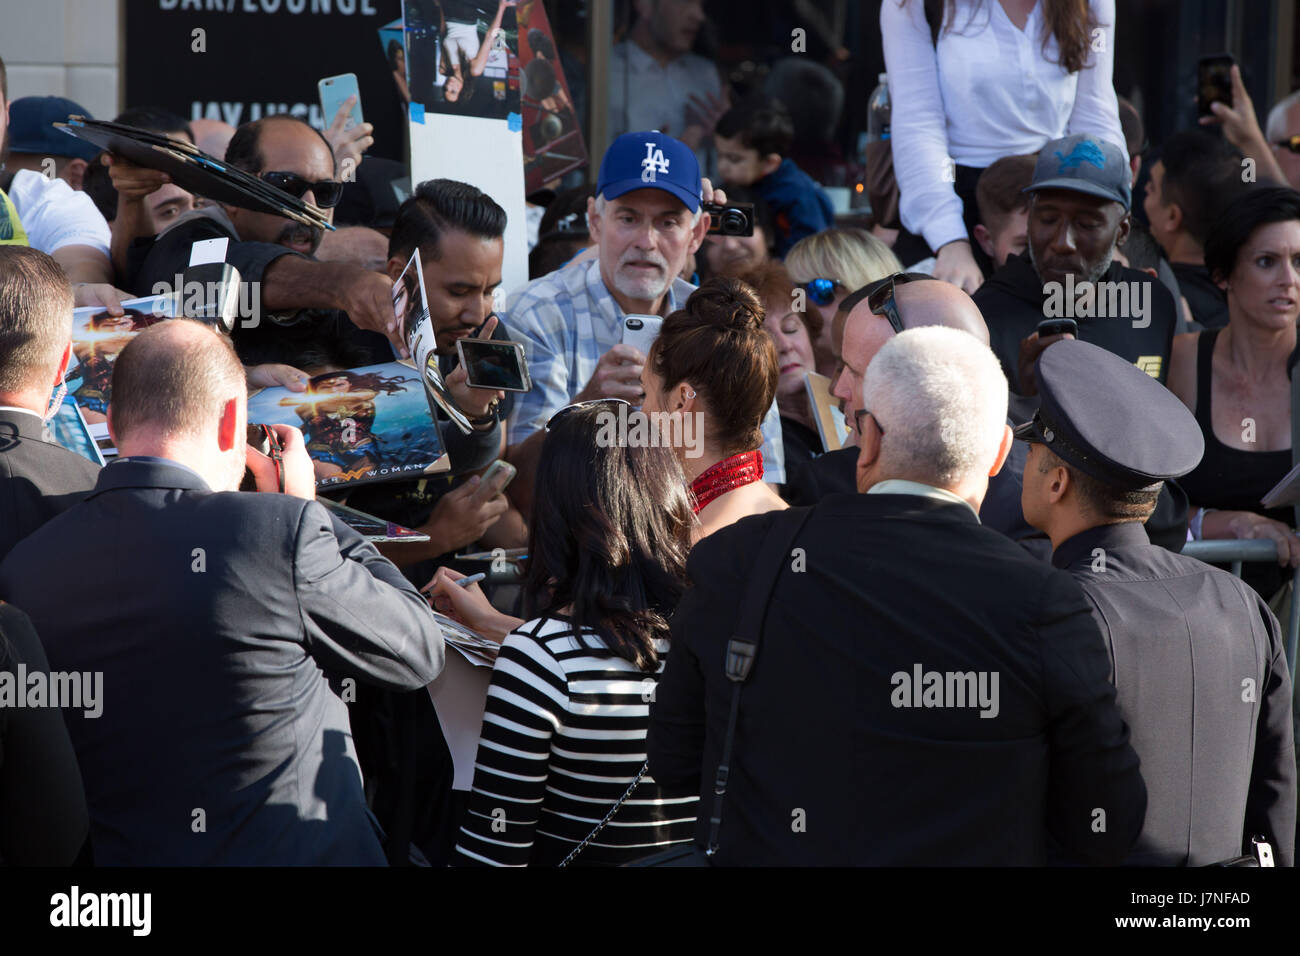 Hollywood, California, USA. 25th May, 2017. Atmospere at the Premiere of Warner Bros. Pictures' 'Wonder Woman' at the Pantages Theatre on May 25, 2017 in Hollywood, California. Credit: The Photo Access/Alamy Live News Stock Photo